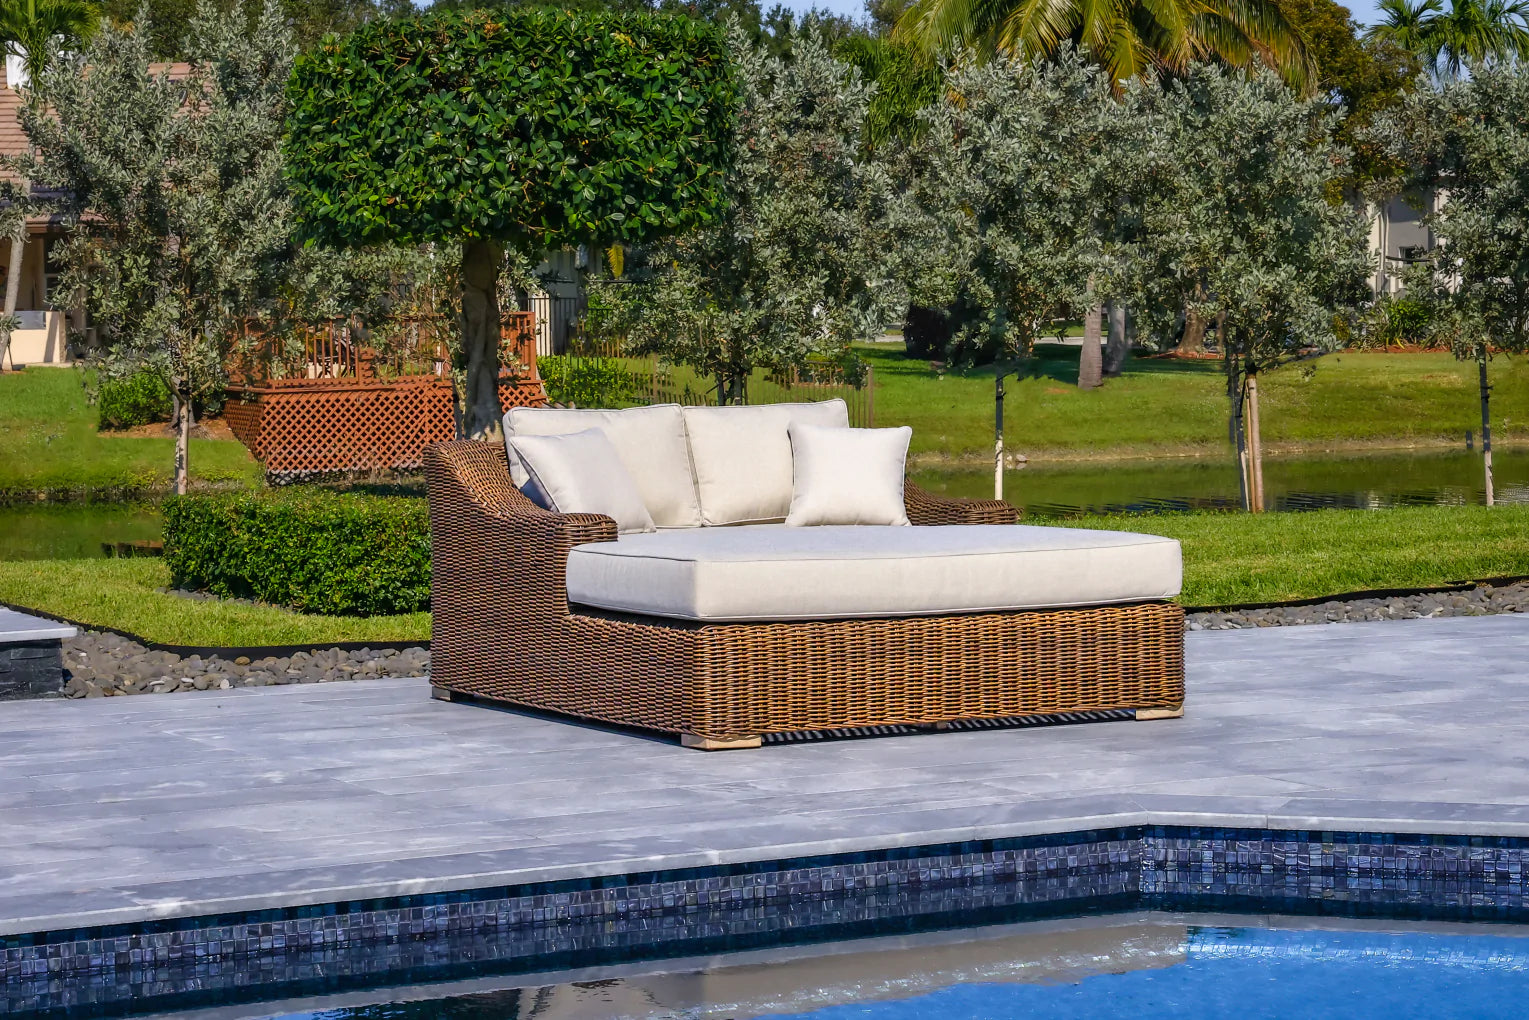 OUTSY - Milo 79 X 59 Inch Outdoor Wicker Aluminum Frame Extra Large Double Sun Lounger in Brown - 0AMI-SL-XL-BR